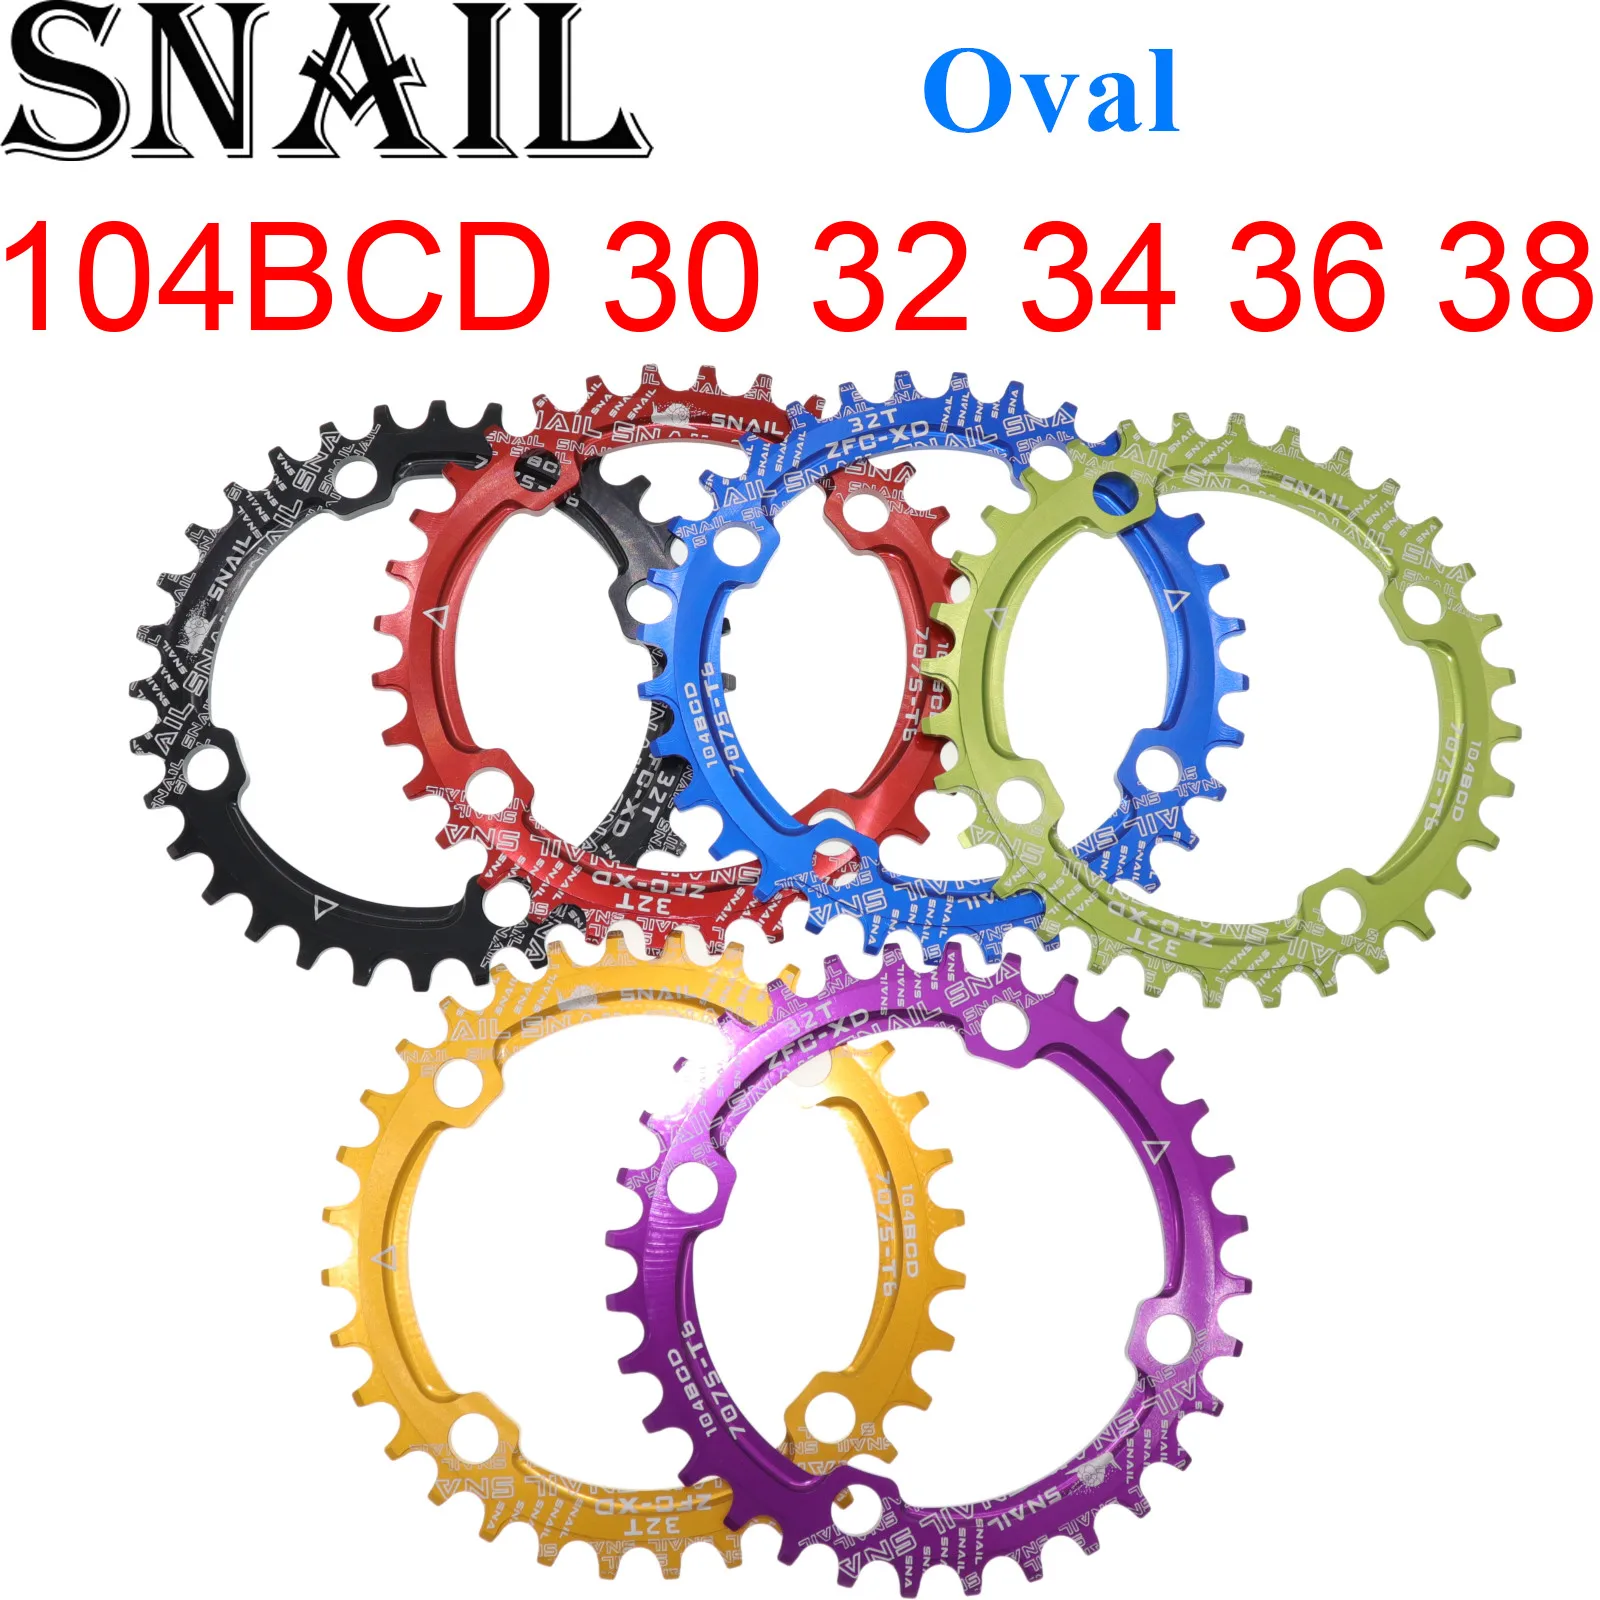 SNAIL 104BCD Oval Bike Bicycle MTB Chainring 32T 34T 36T 38T Narrow Wide Ultralight Tooth Plate MTB Mountain BCD 104 Chainwheel